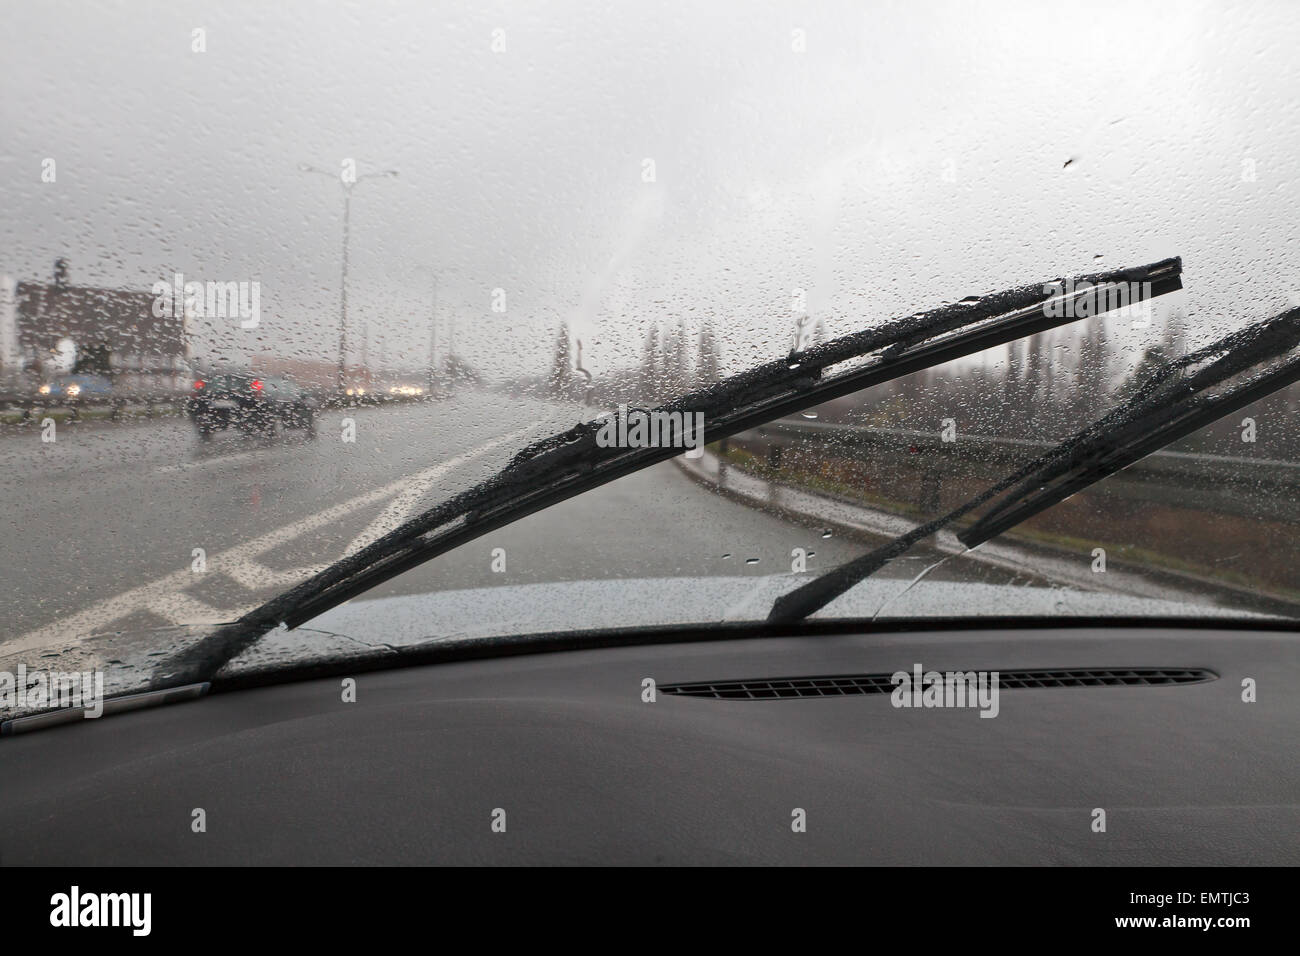 Driving in bad weather conditions, wipers working Stock Photo